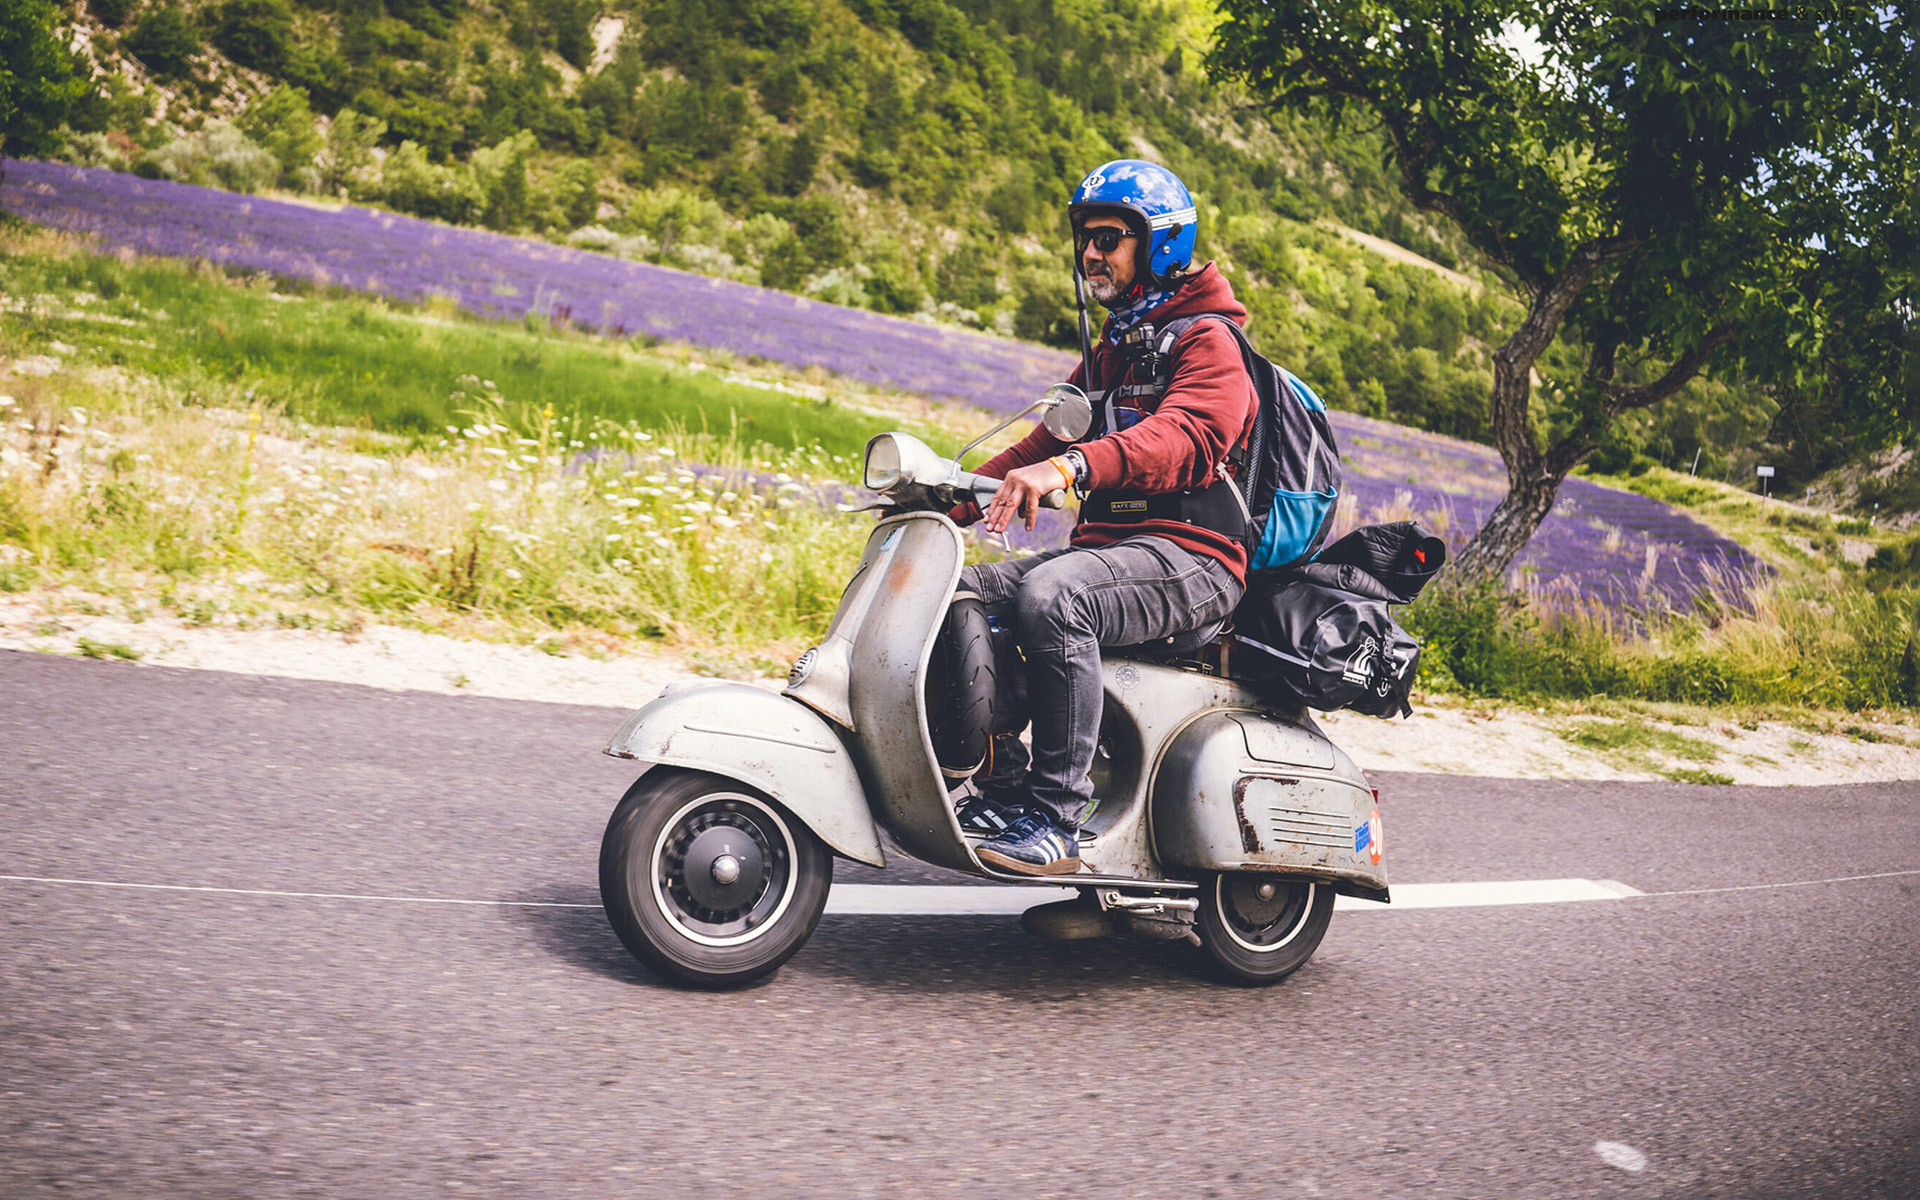 Explore the South of France with the Vespa – Road Trip